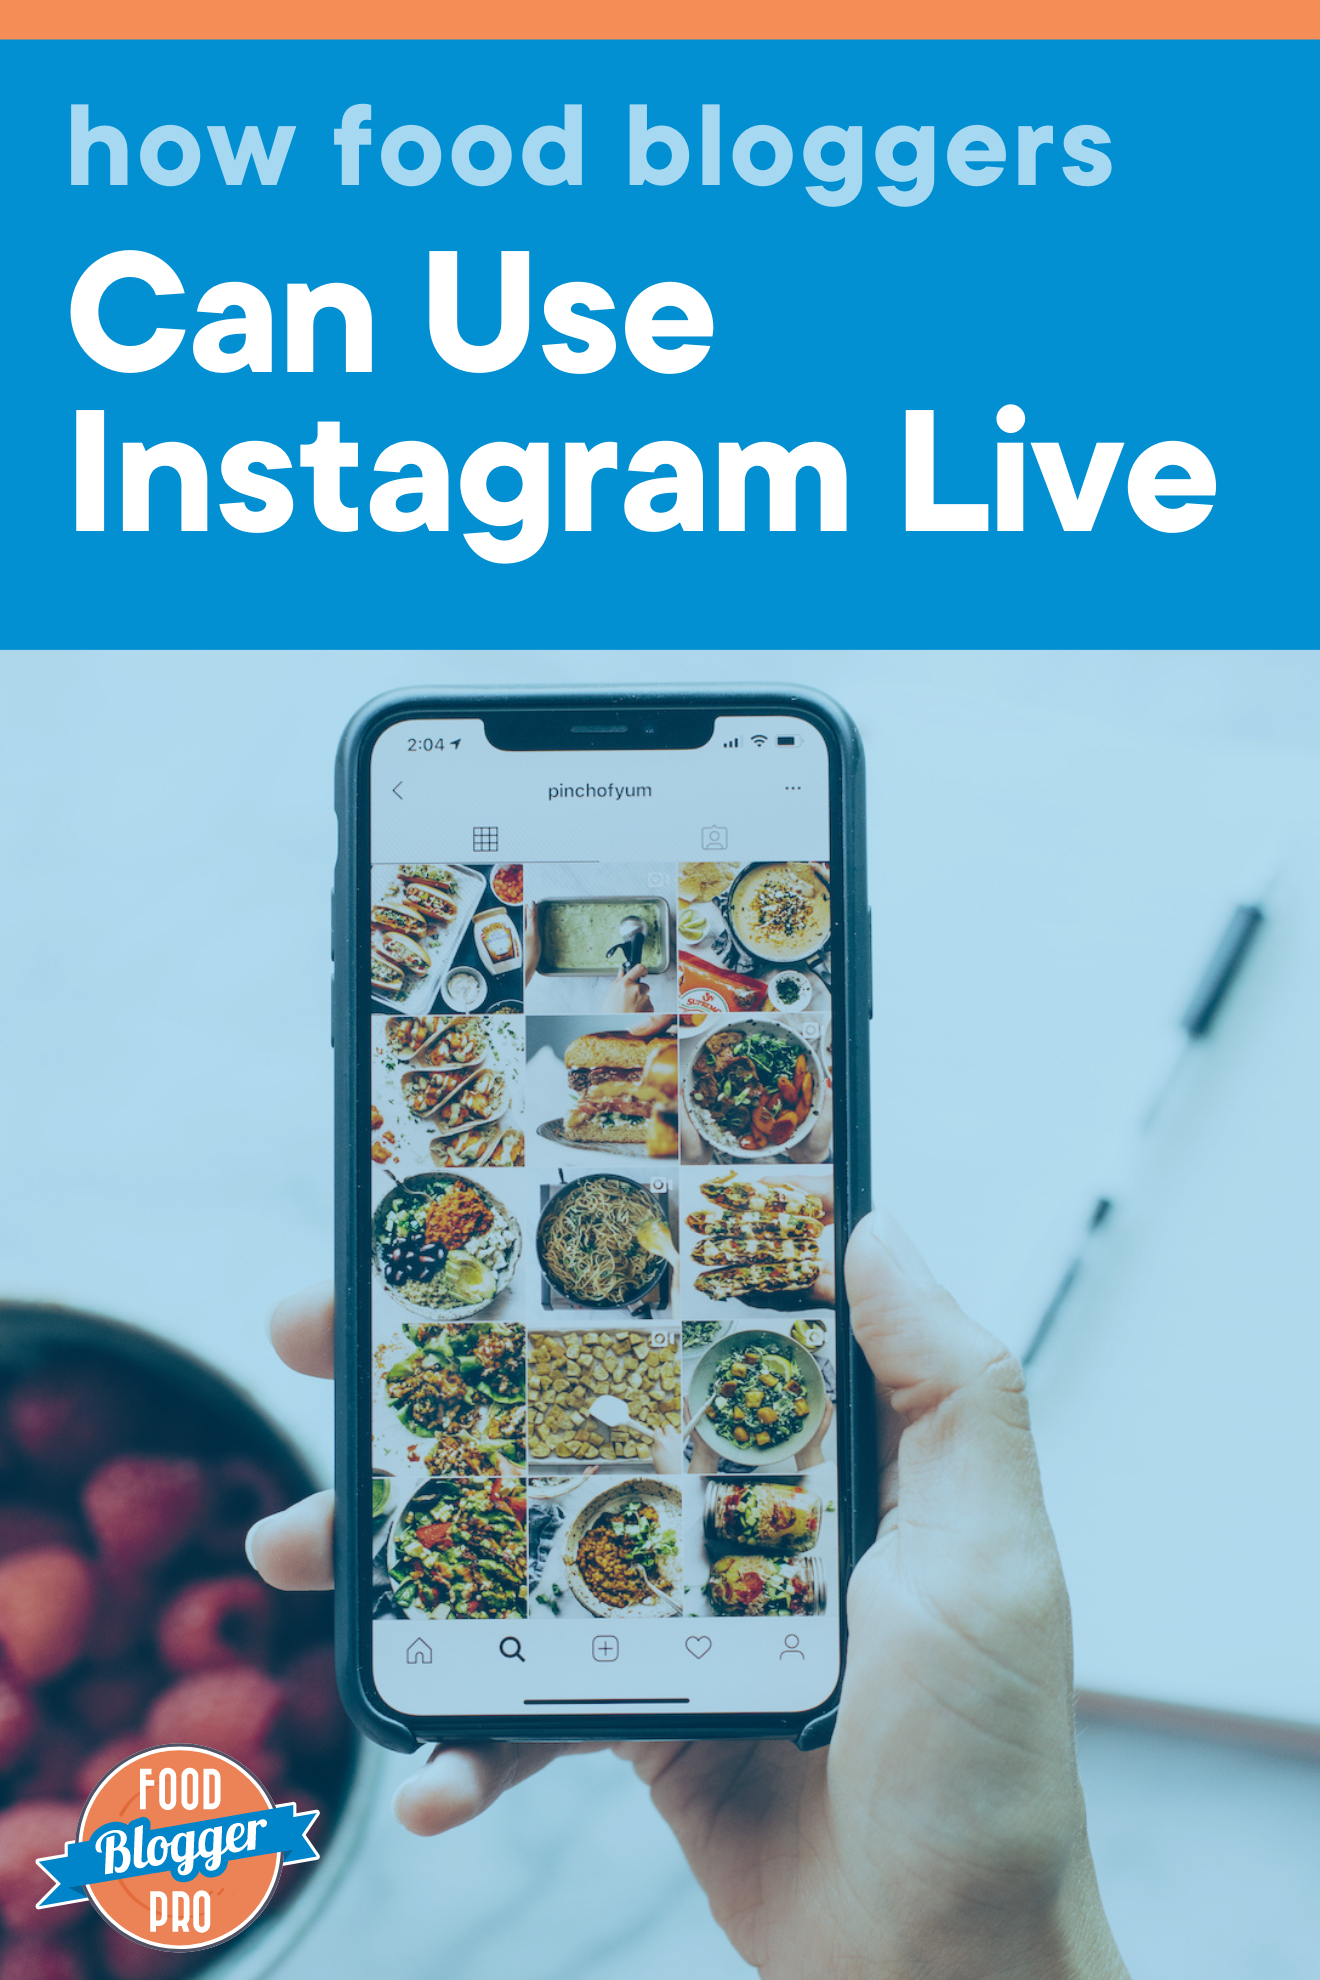 Phone with Pinch of Yum Instagram that reads 'How Food Bloggers Can Use Instagram Live'